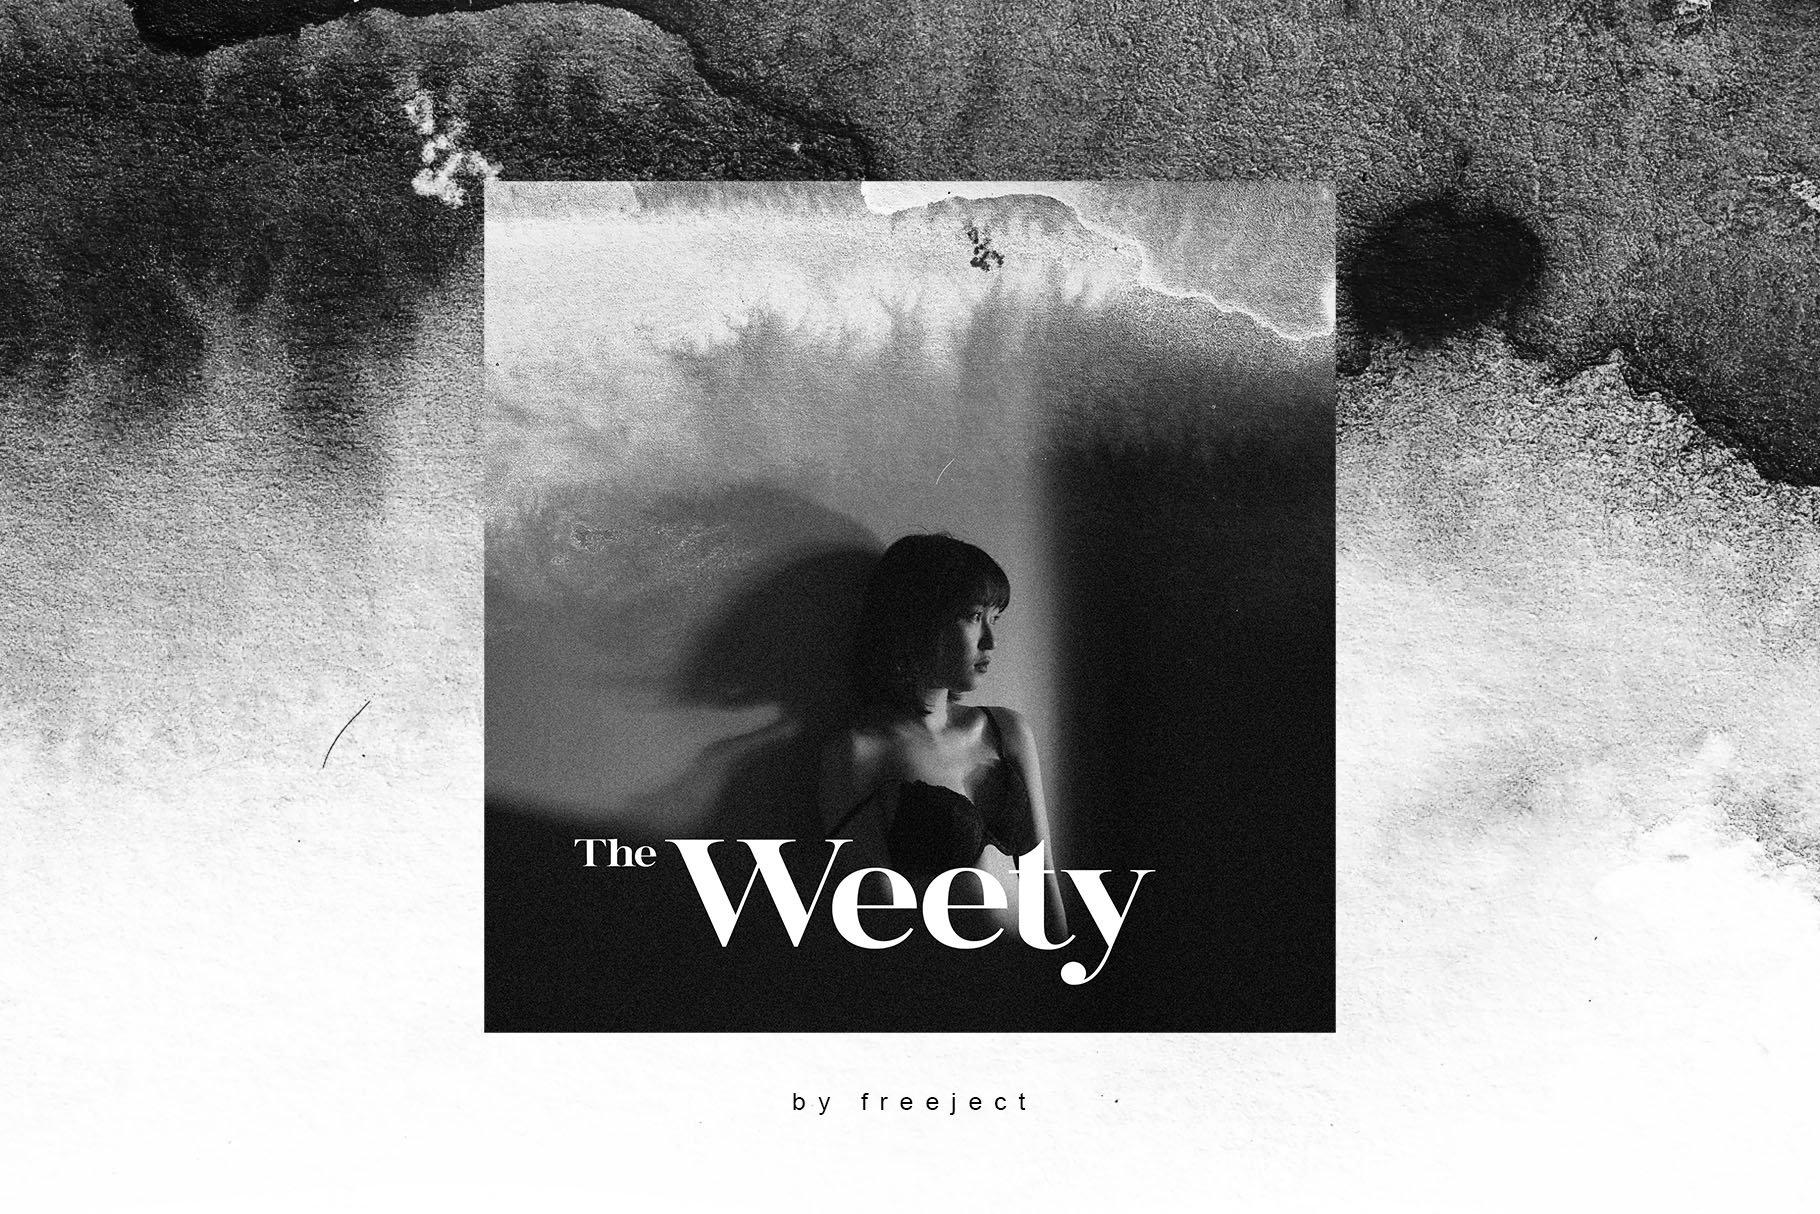 The Weety Texture & Brushcover image.